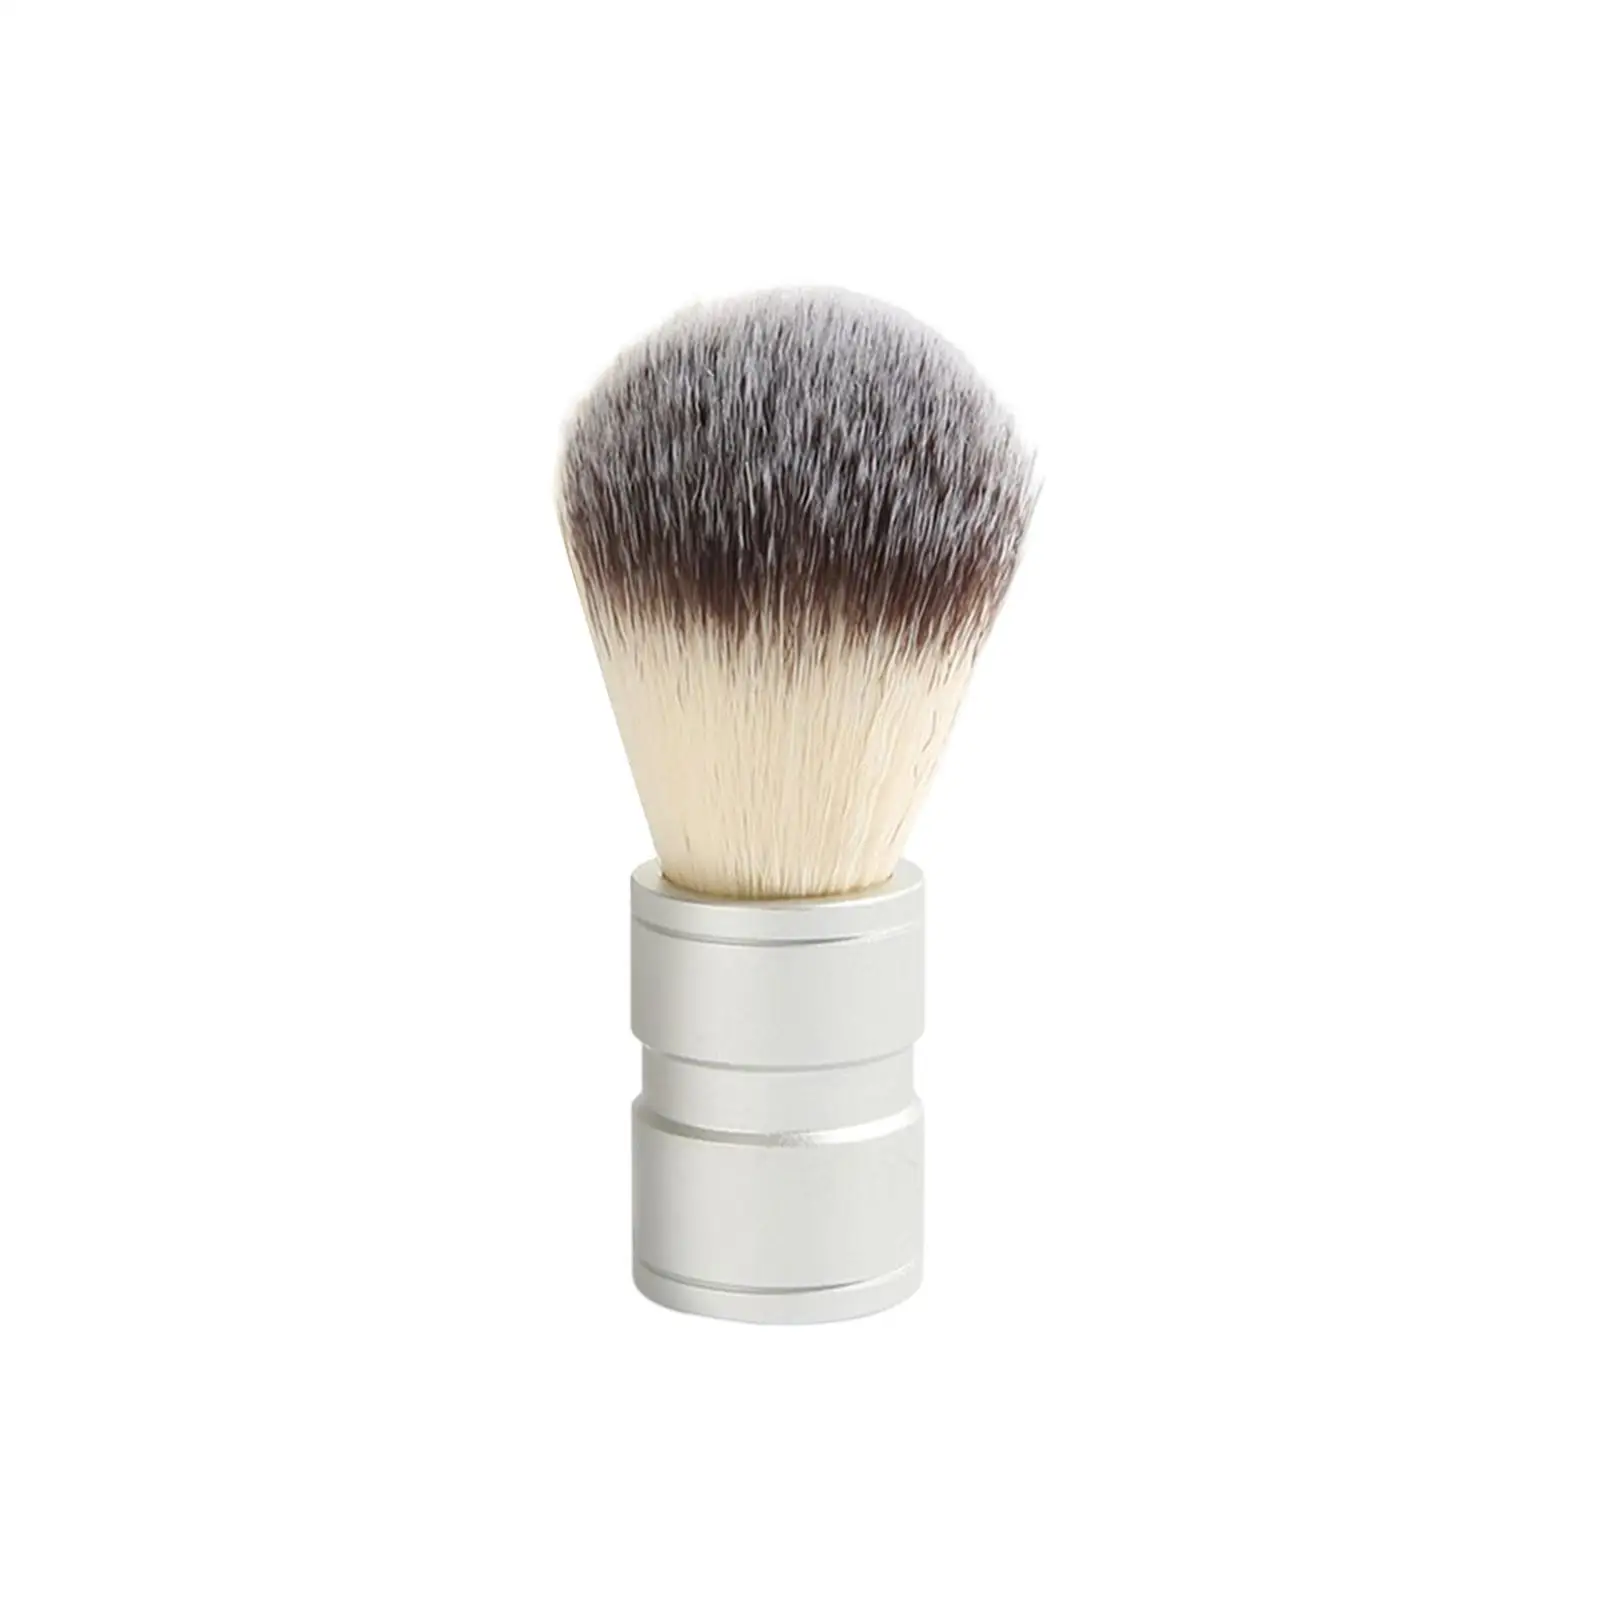 Shaving Brush Male Grooming Soft for Home Father Fathers Day Gift